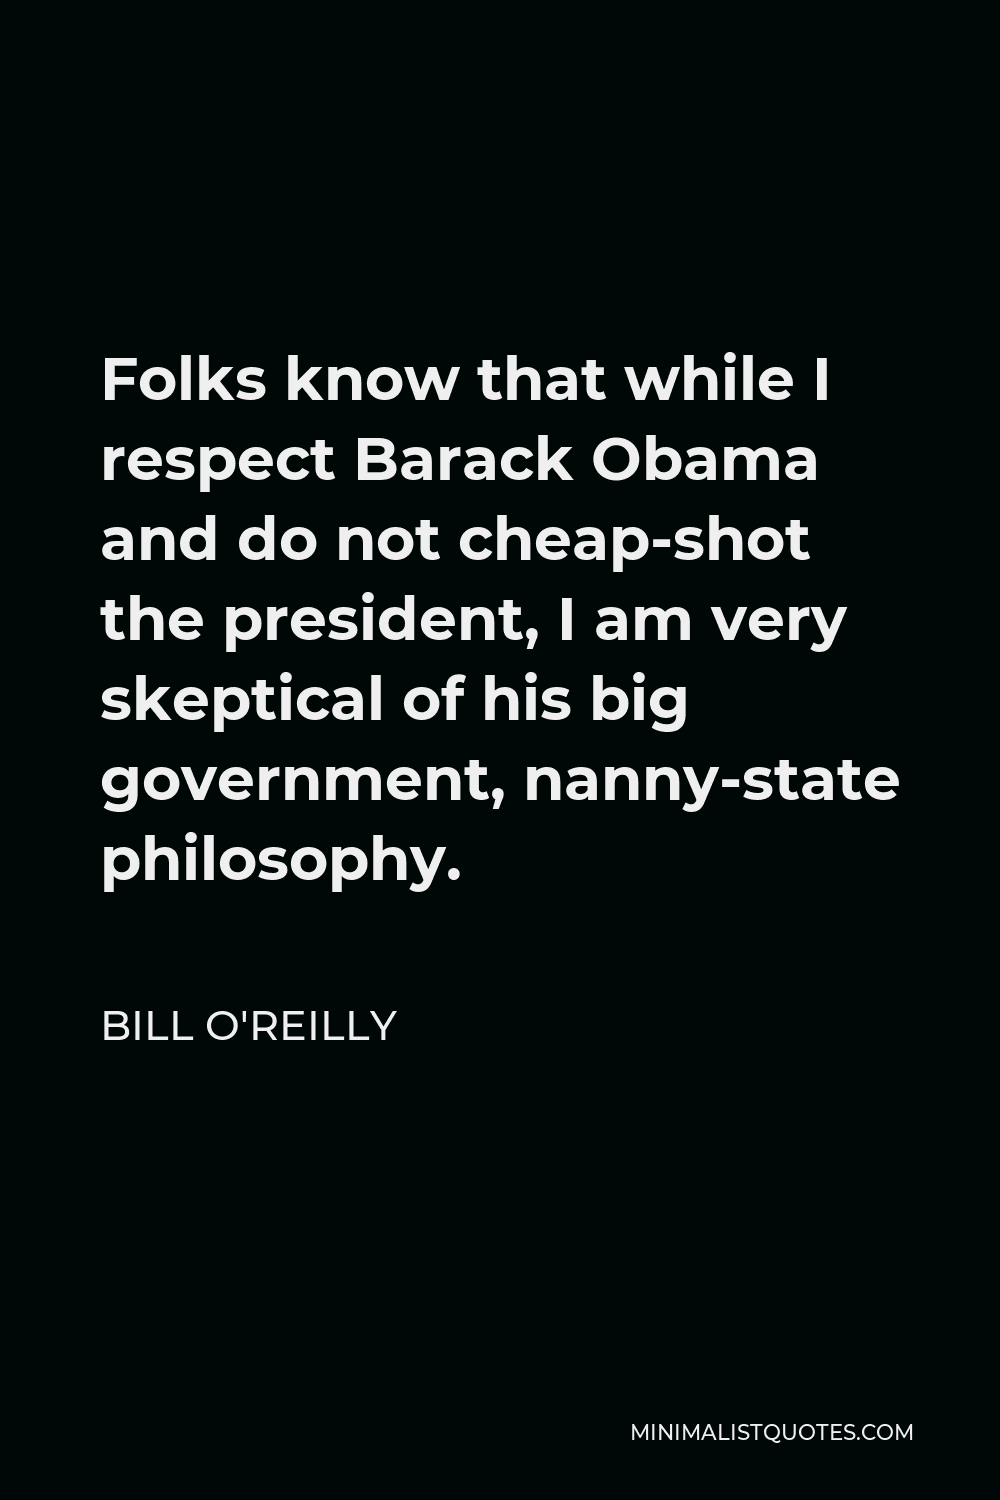 Bill O'Reilly Quote - Folks know that while I respect Barack Obama and do not cheap-shot the president, I am very skeptical of his big government, nanny-state philosophy.